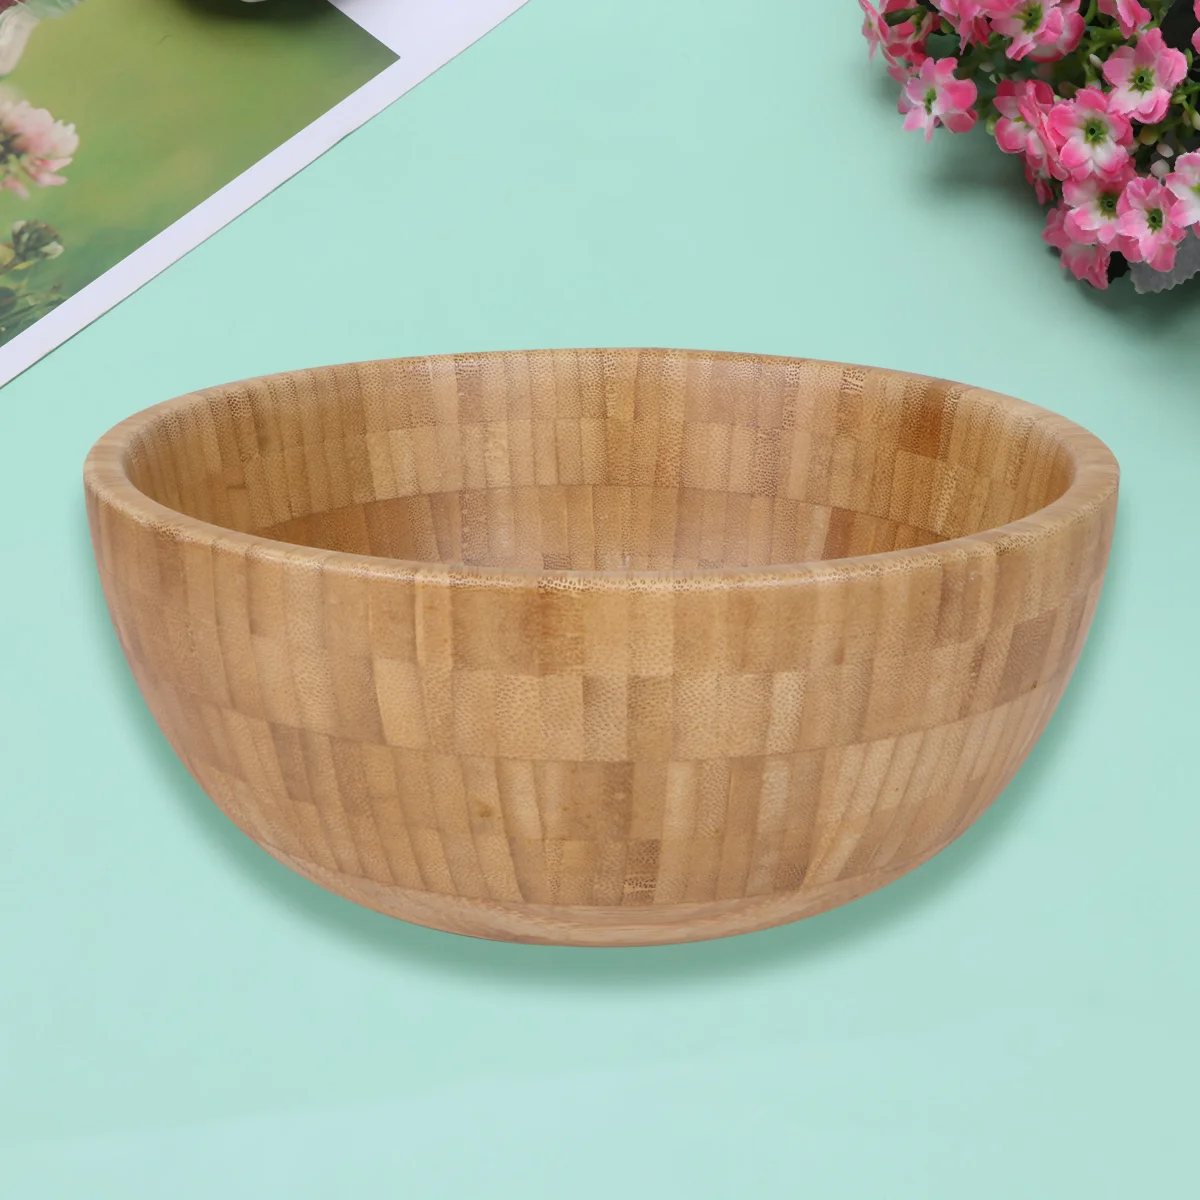 

Italian Pasta Bowls Vintage Wooden Bowl Hand Decor Wooden Serving Bowls Woodsy Decor Bamboo Rice Bowl Cereal Bowl